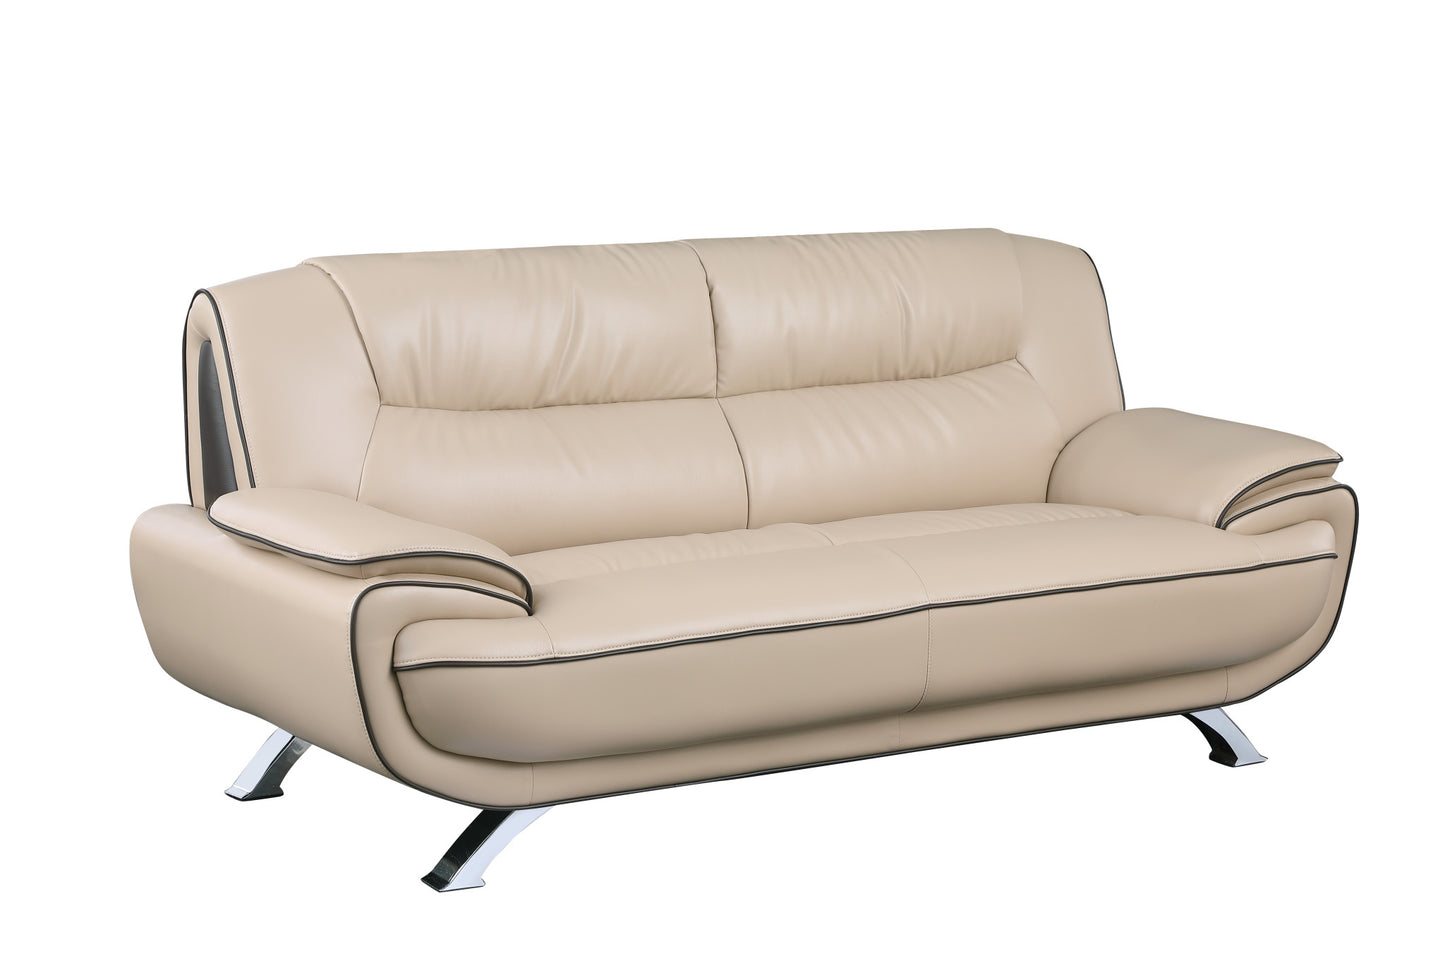 80" Beige And Silver Leather Sofa